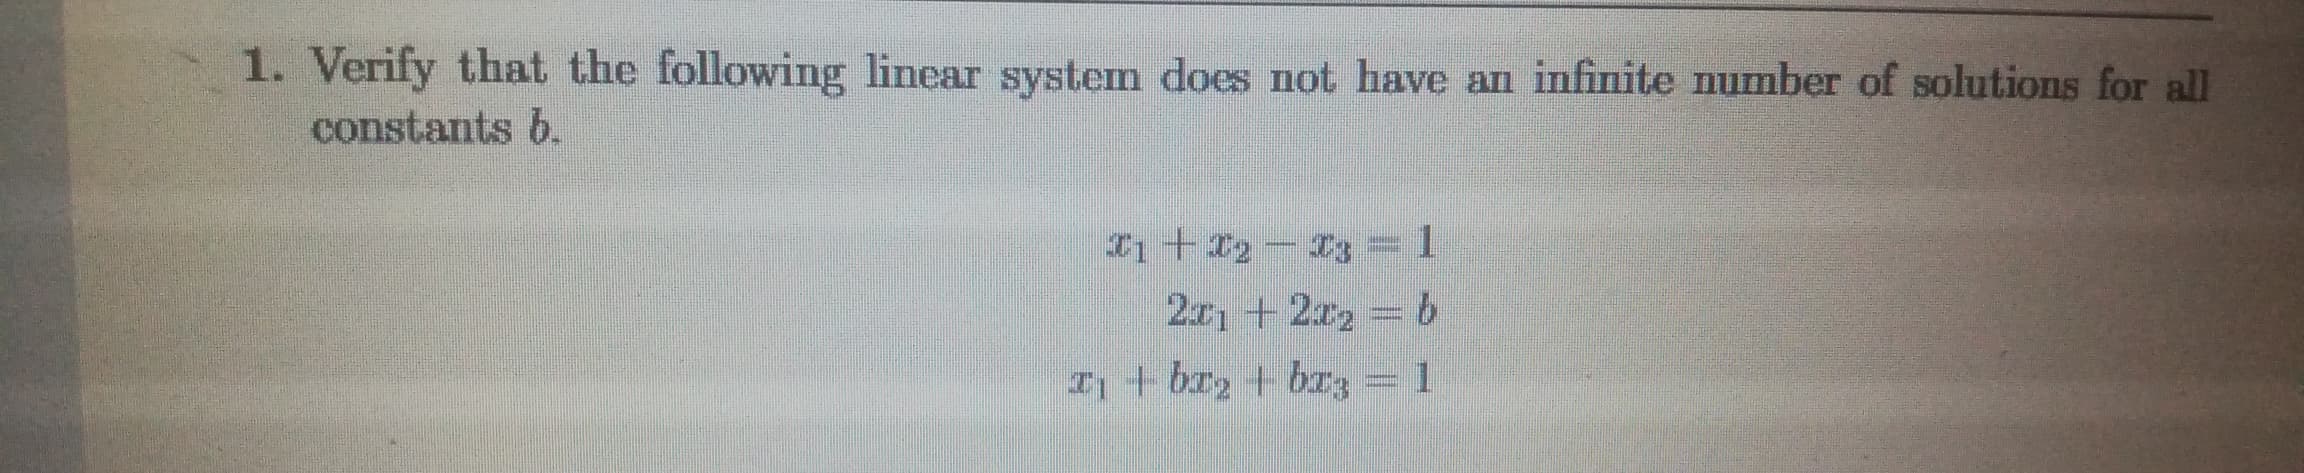 Verify that the following linear system does not have an infinite number of solutions for all
constants b.
2x1 +2x2
I+ br2 + b3 = 1
